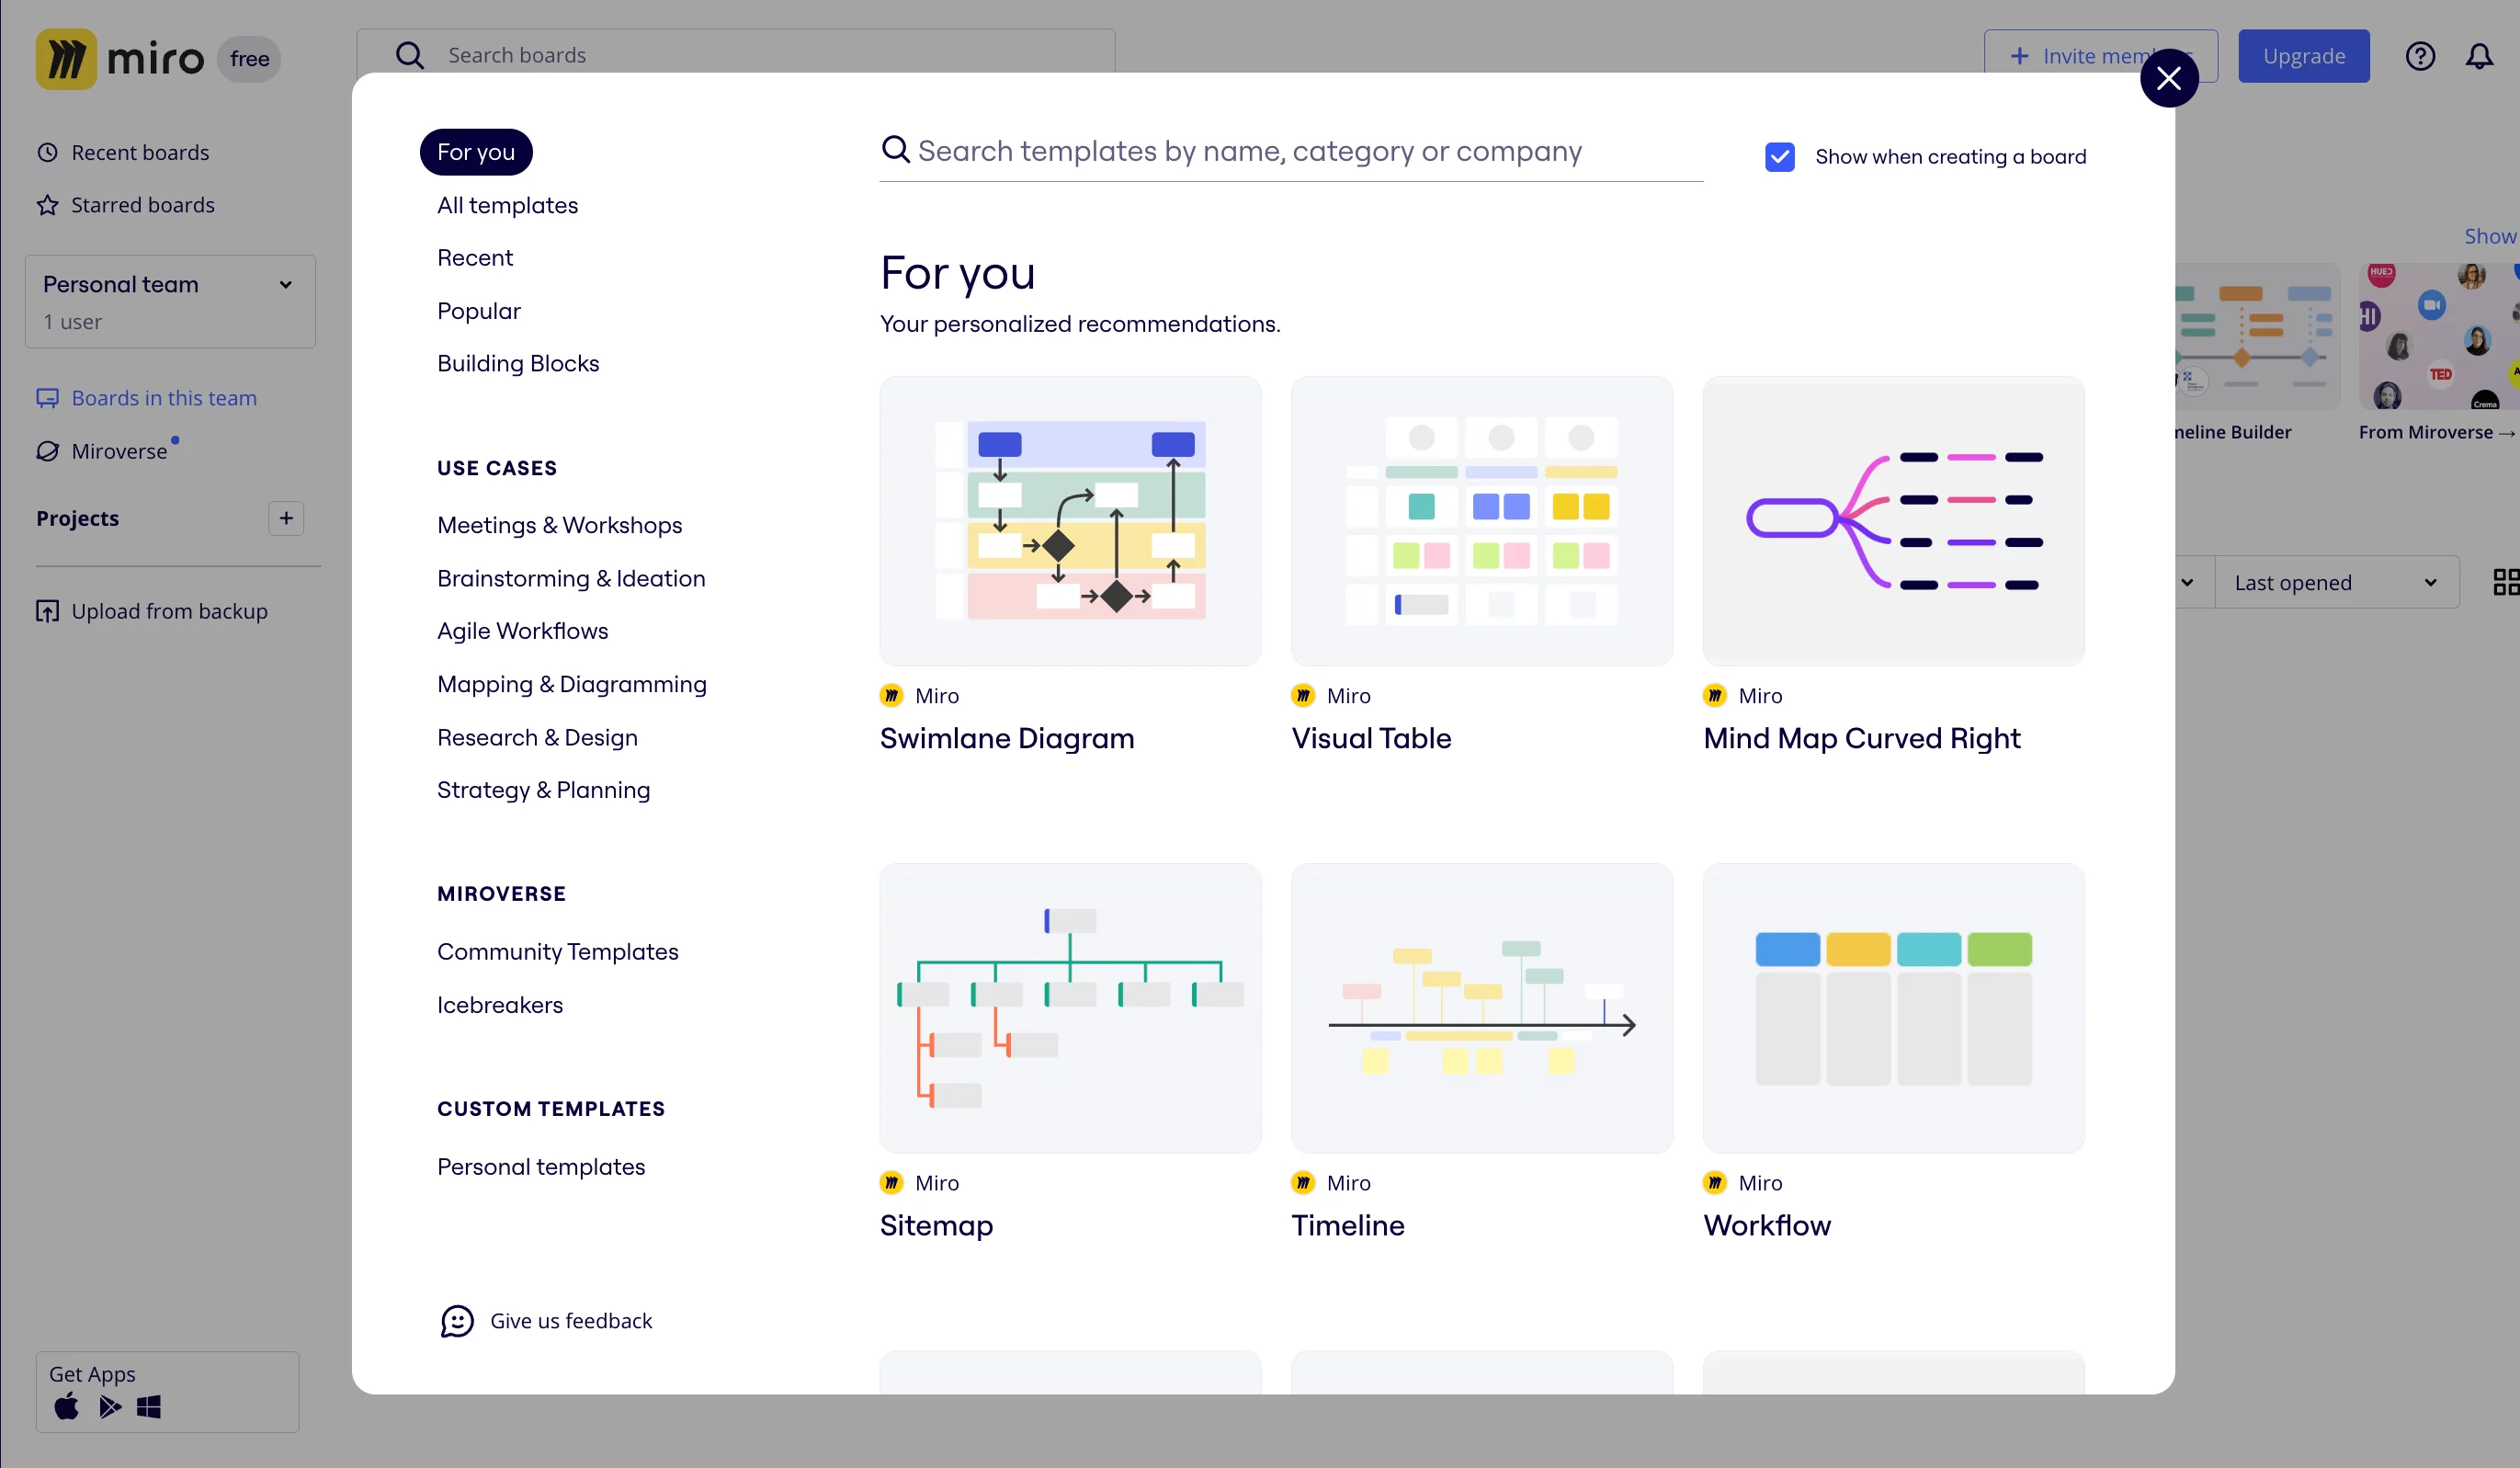 Miro's interface displaying a variety of templates for creative collaboration, including use cases for meetings & workshops, brainstorming & ideation, agile workflows, mapping & diagramming, research & design, and strategy & planning